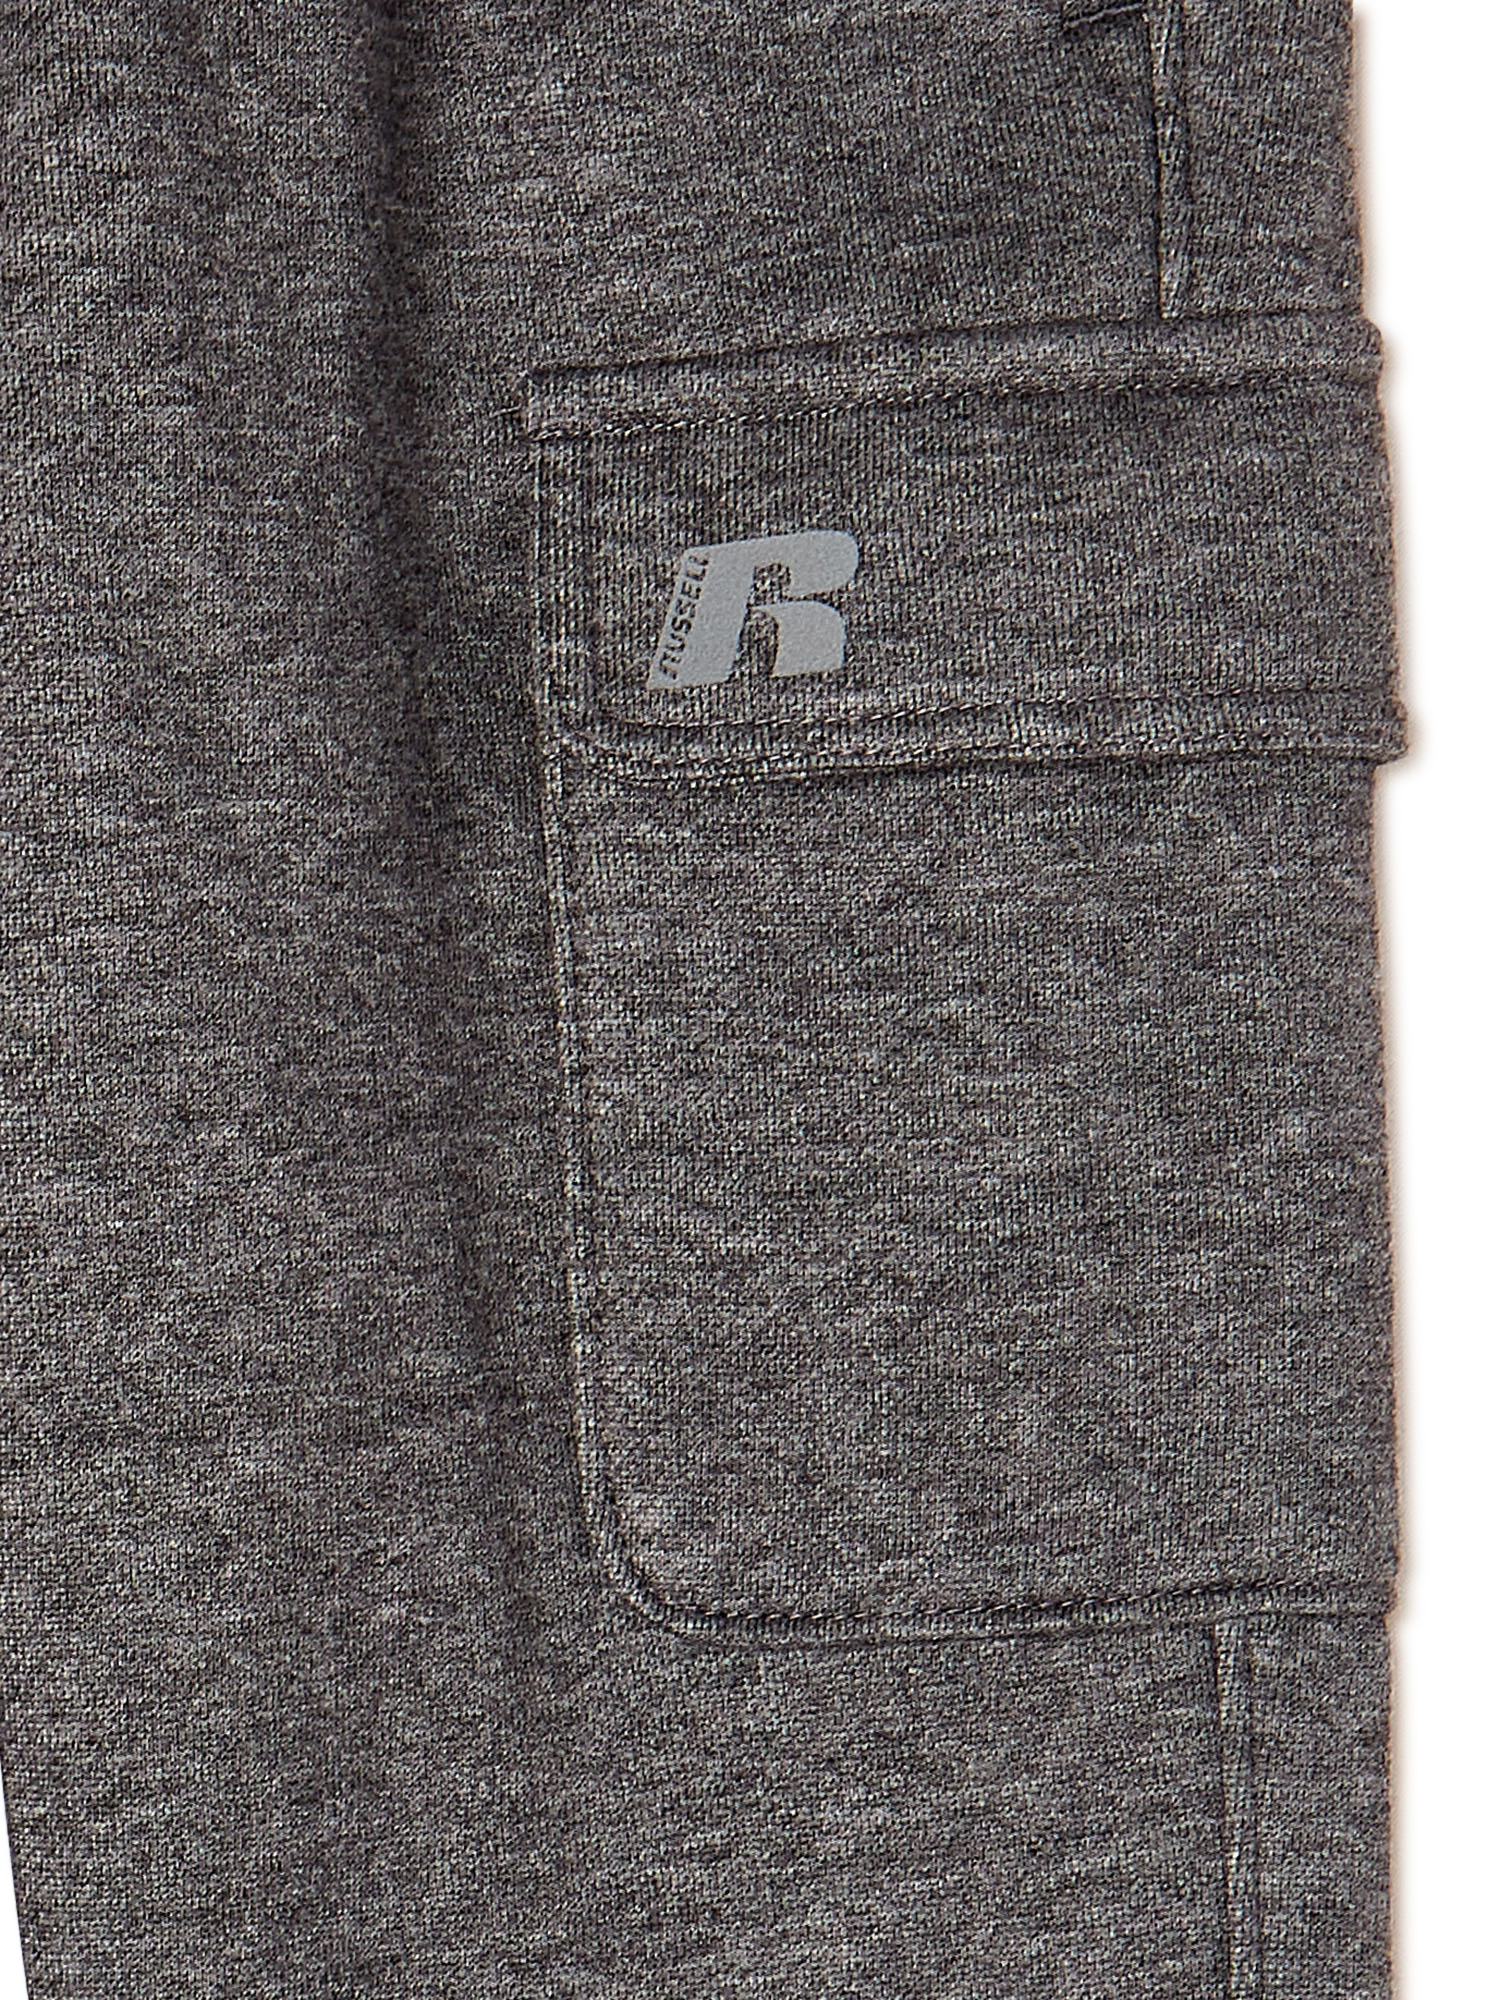 Russell Boys Athletic Cargo Pants, Sizes 4-18 & Husky - image 2 of 3